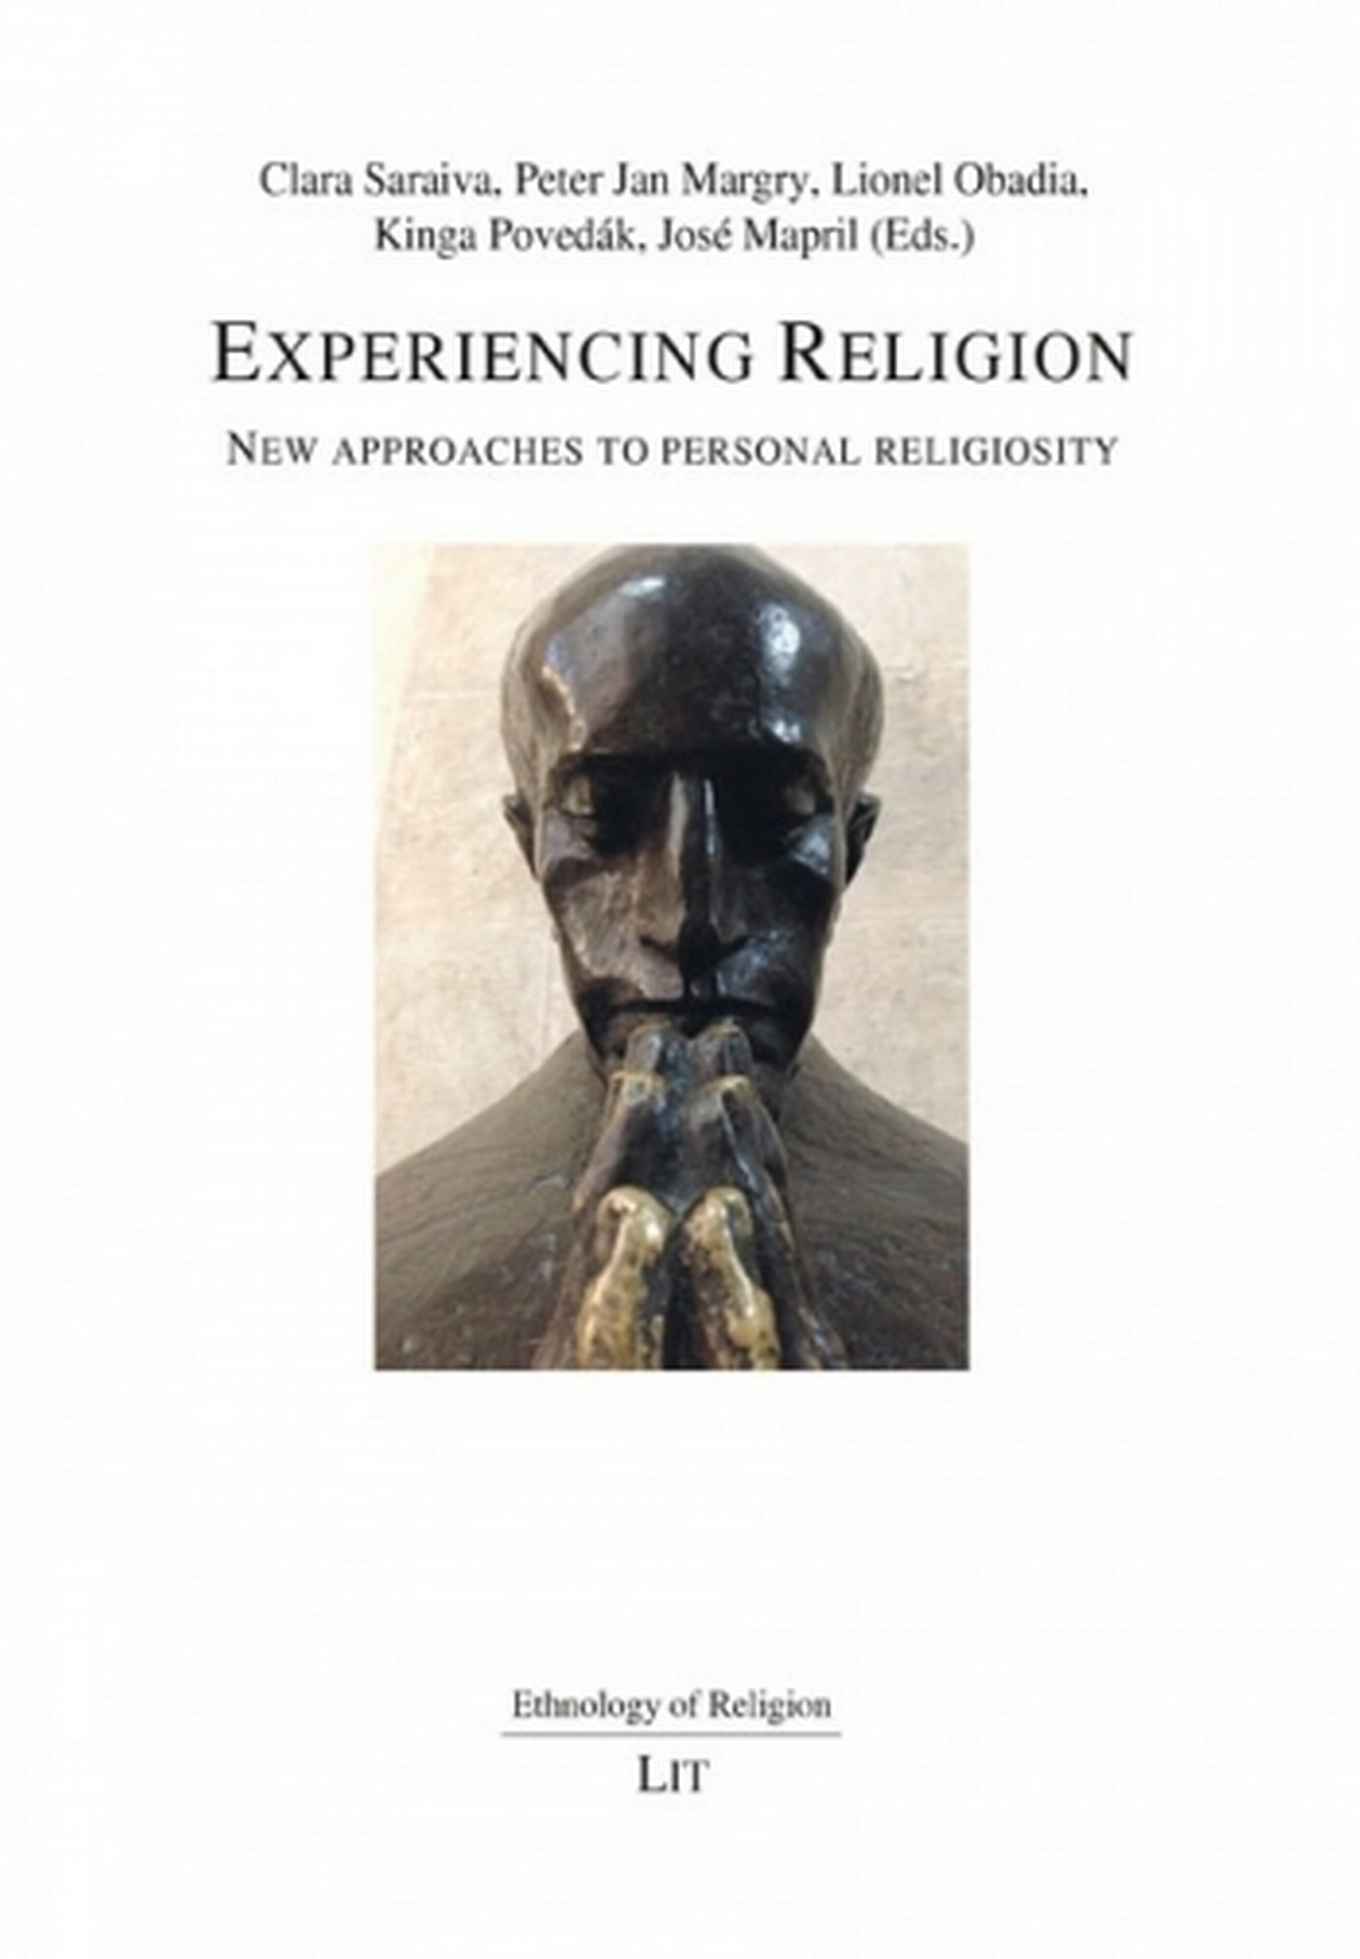 Experiencing Religion. New Approaches to personal religiosity | Peter Jan Margry (ed.)